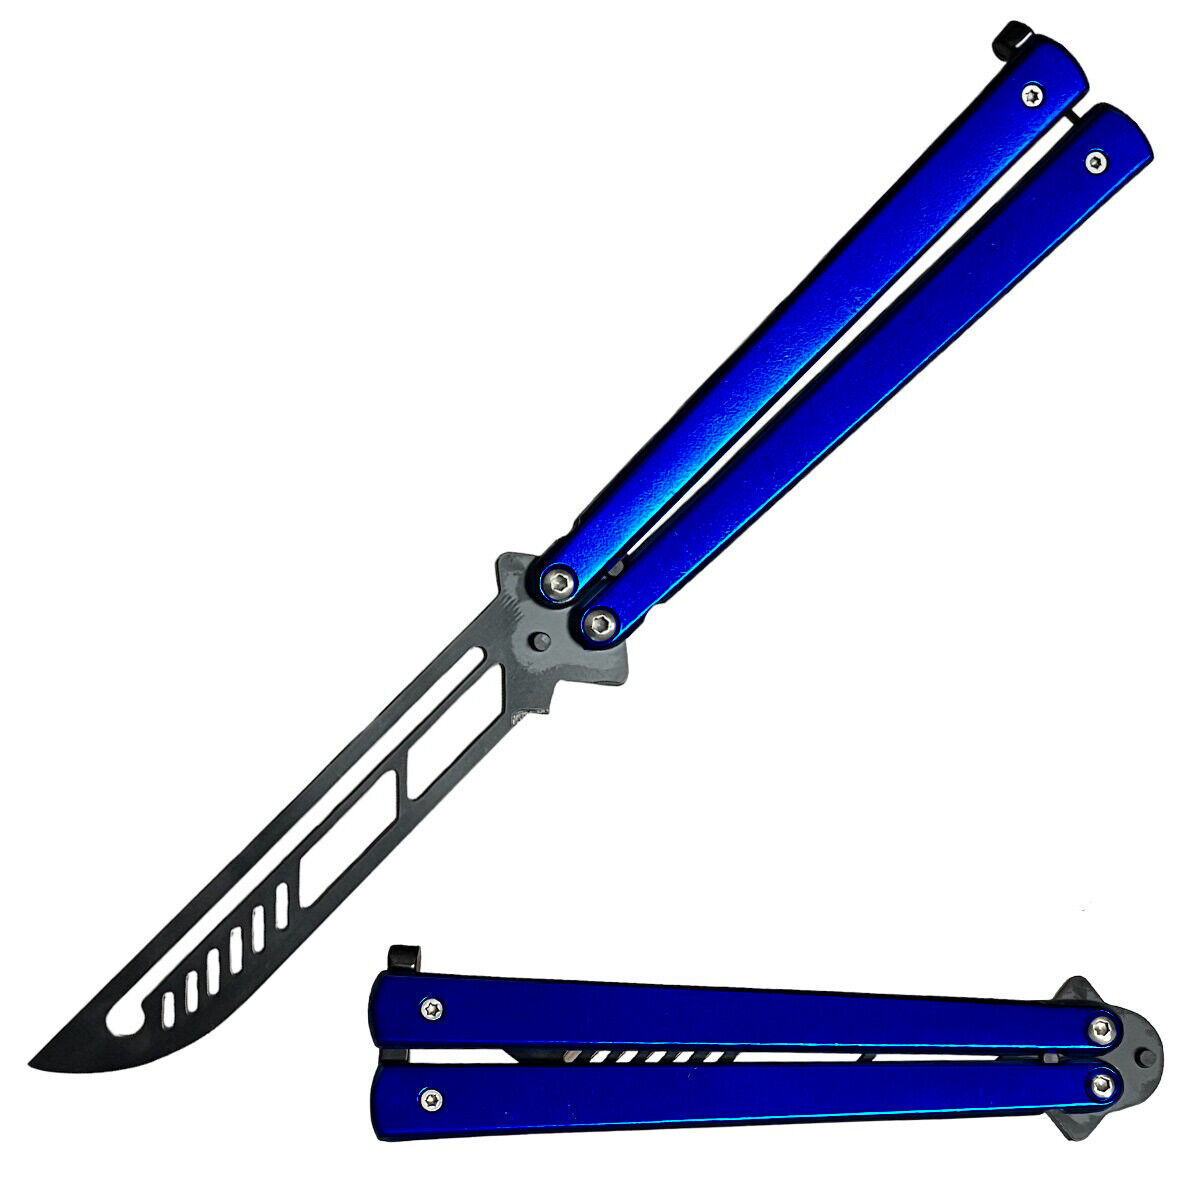 High Quality Practice BALISONG METAL BUTTERFLY Trainer Dull Knife Fake Blade